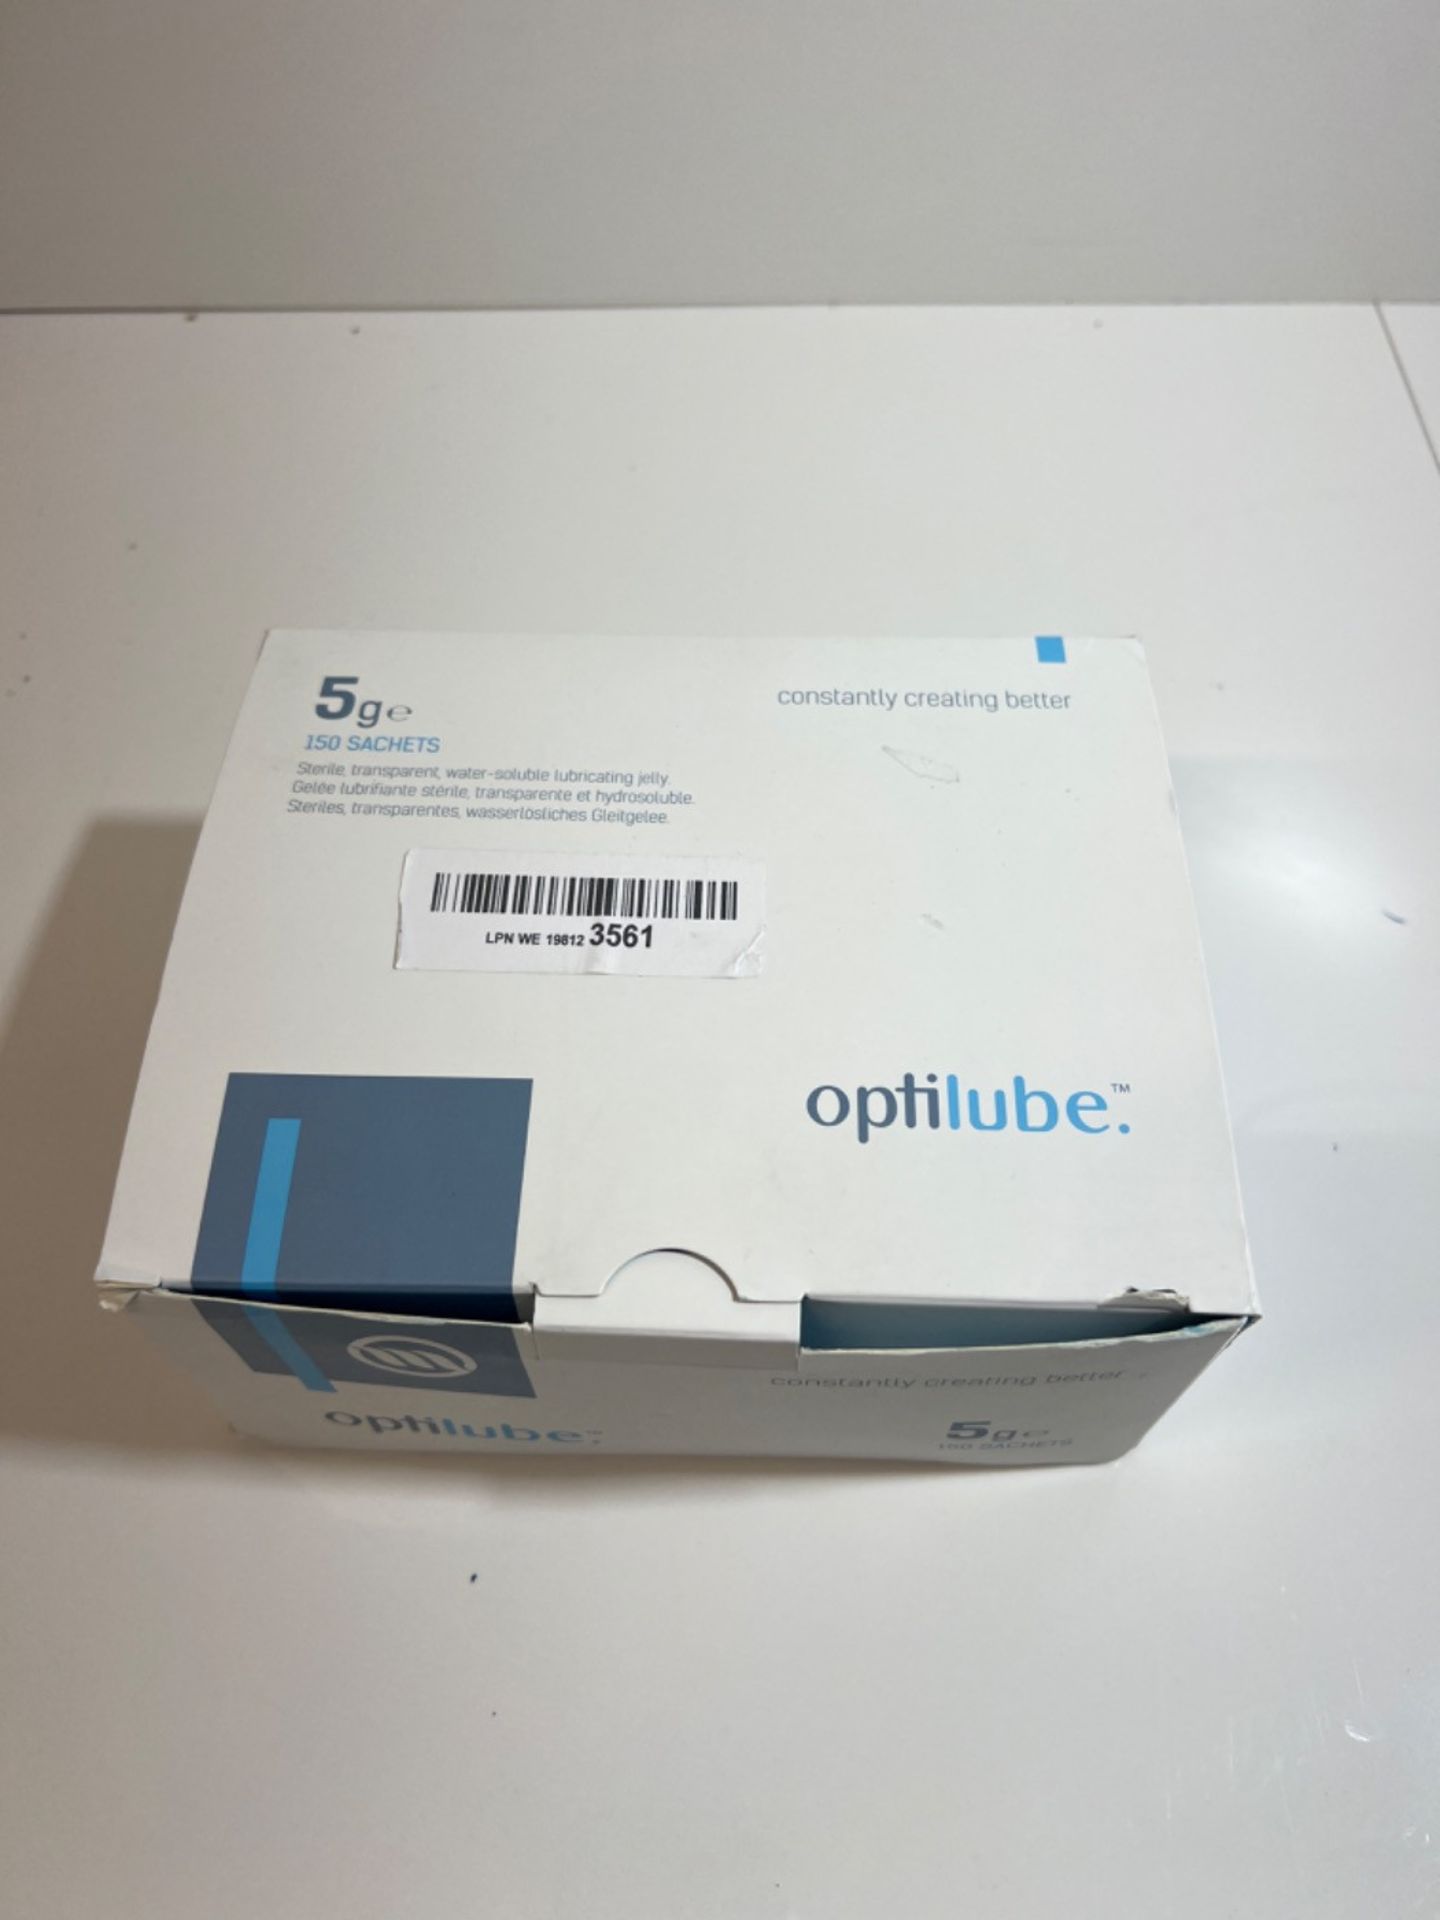 OptiLube Sachets (5g x150) - Sterile Lubricating Jelly in Sachets, Water Soluble with Easy Tear Pac - Image 2 of 3